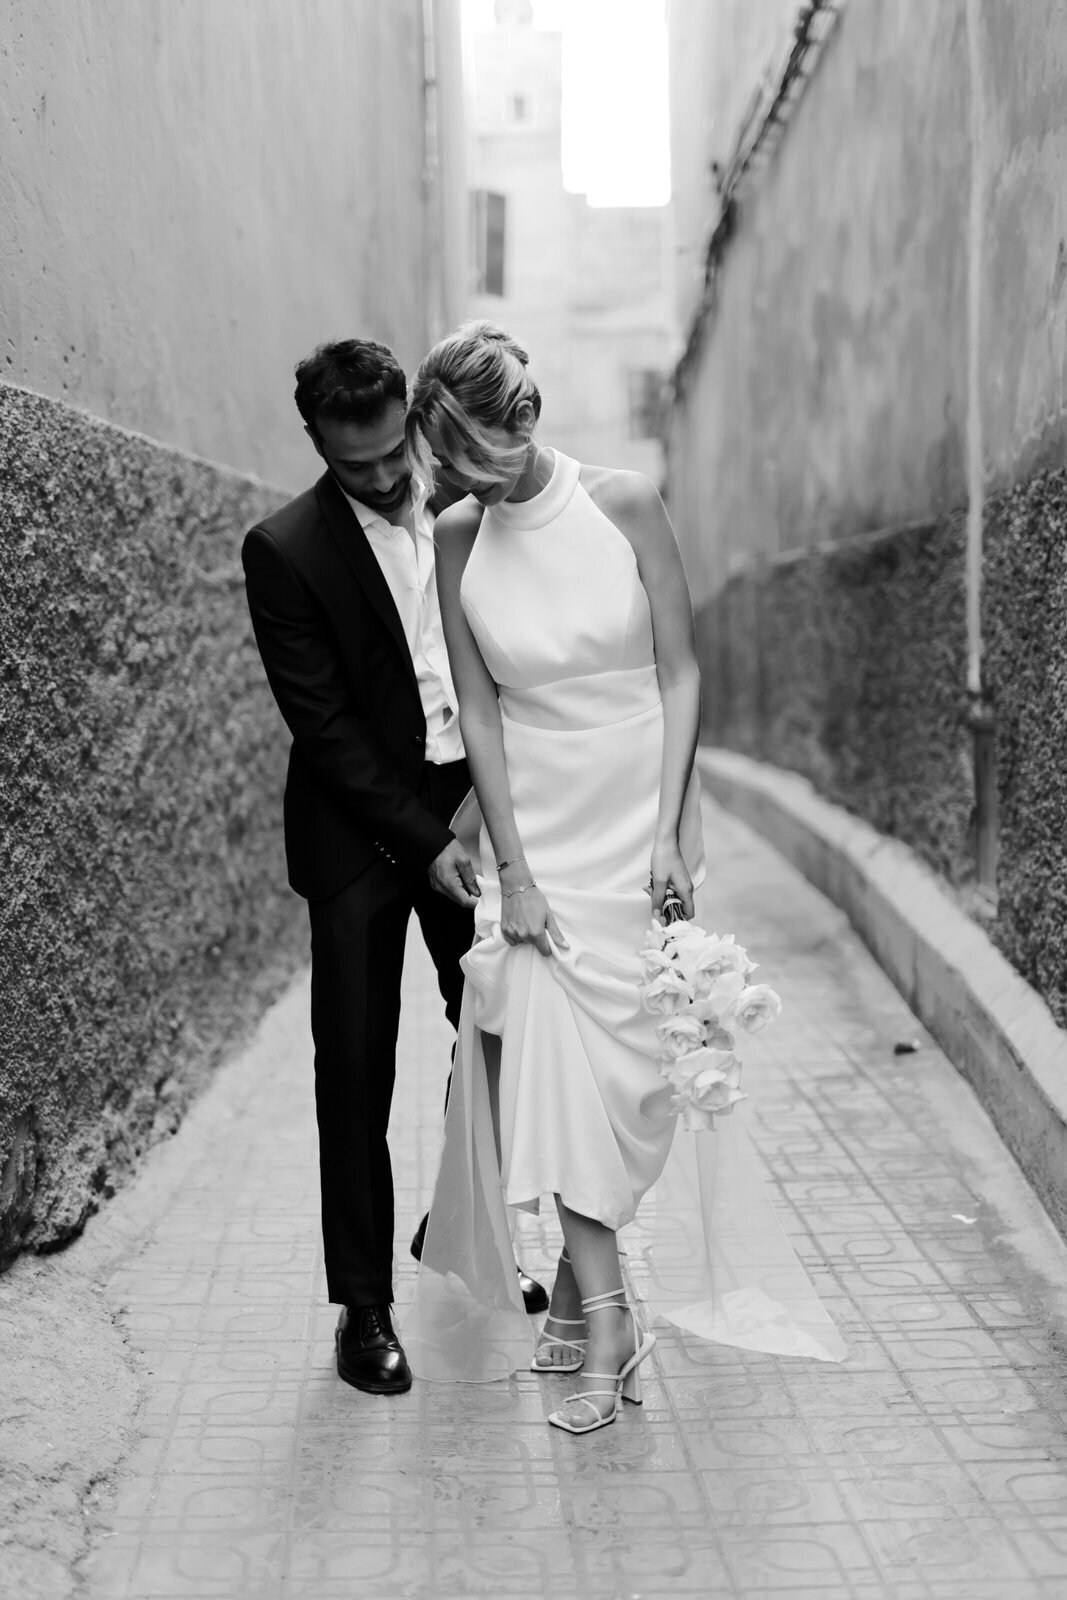 Stylish Elopement Photography in Marrakech 11